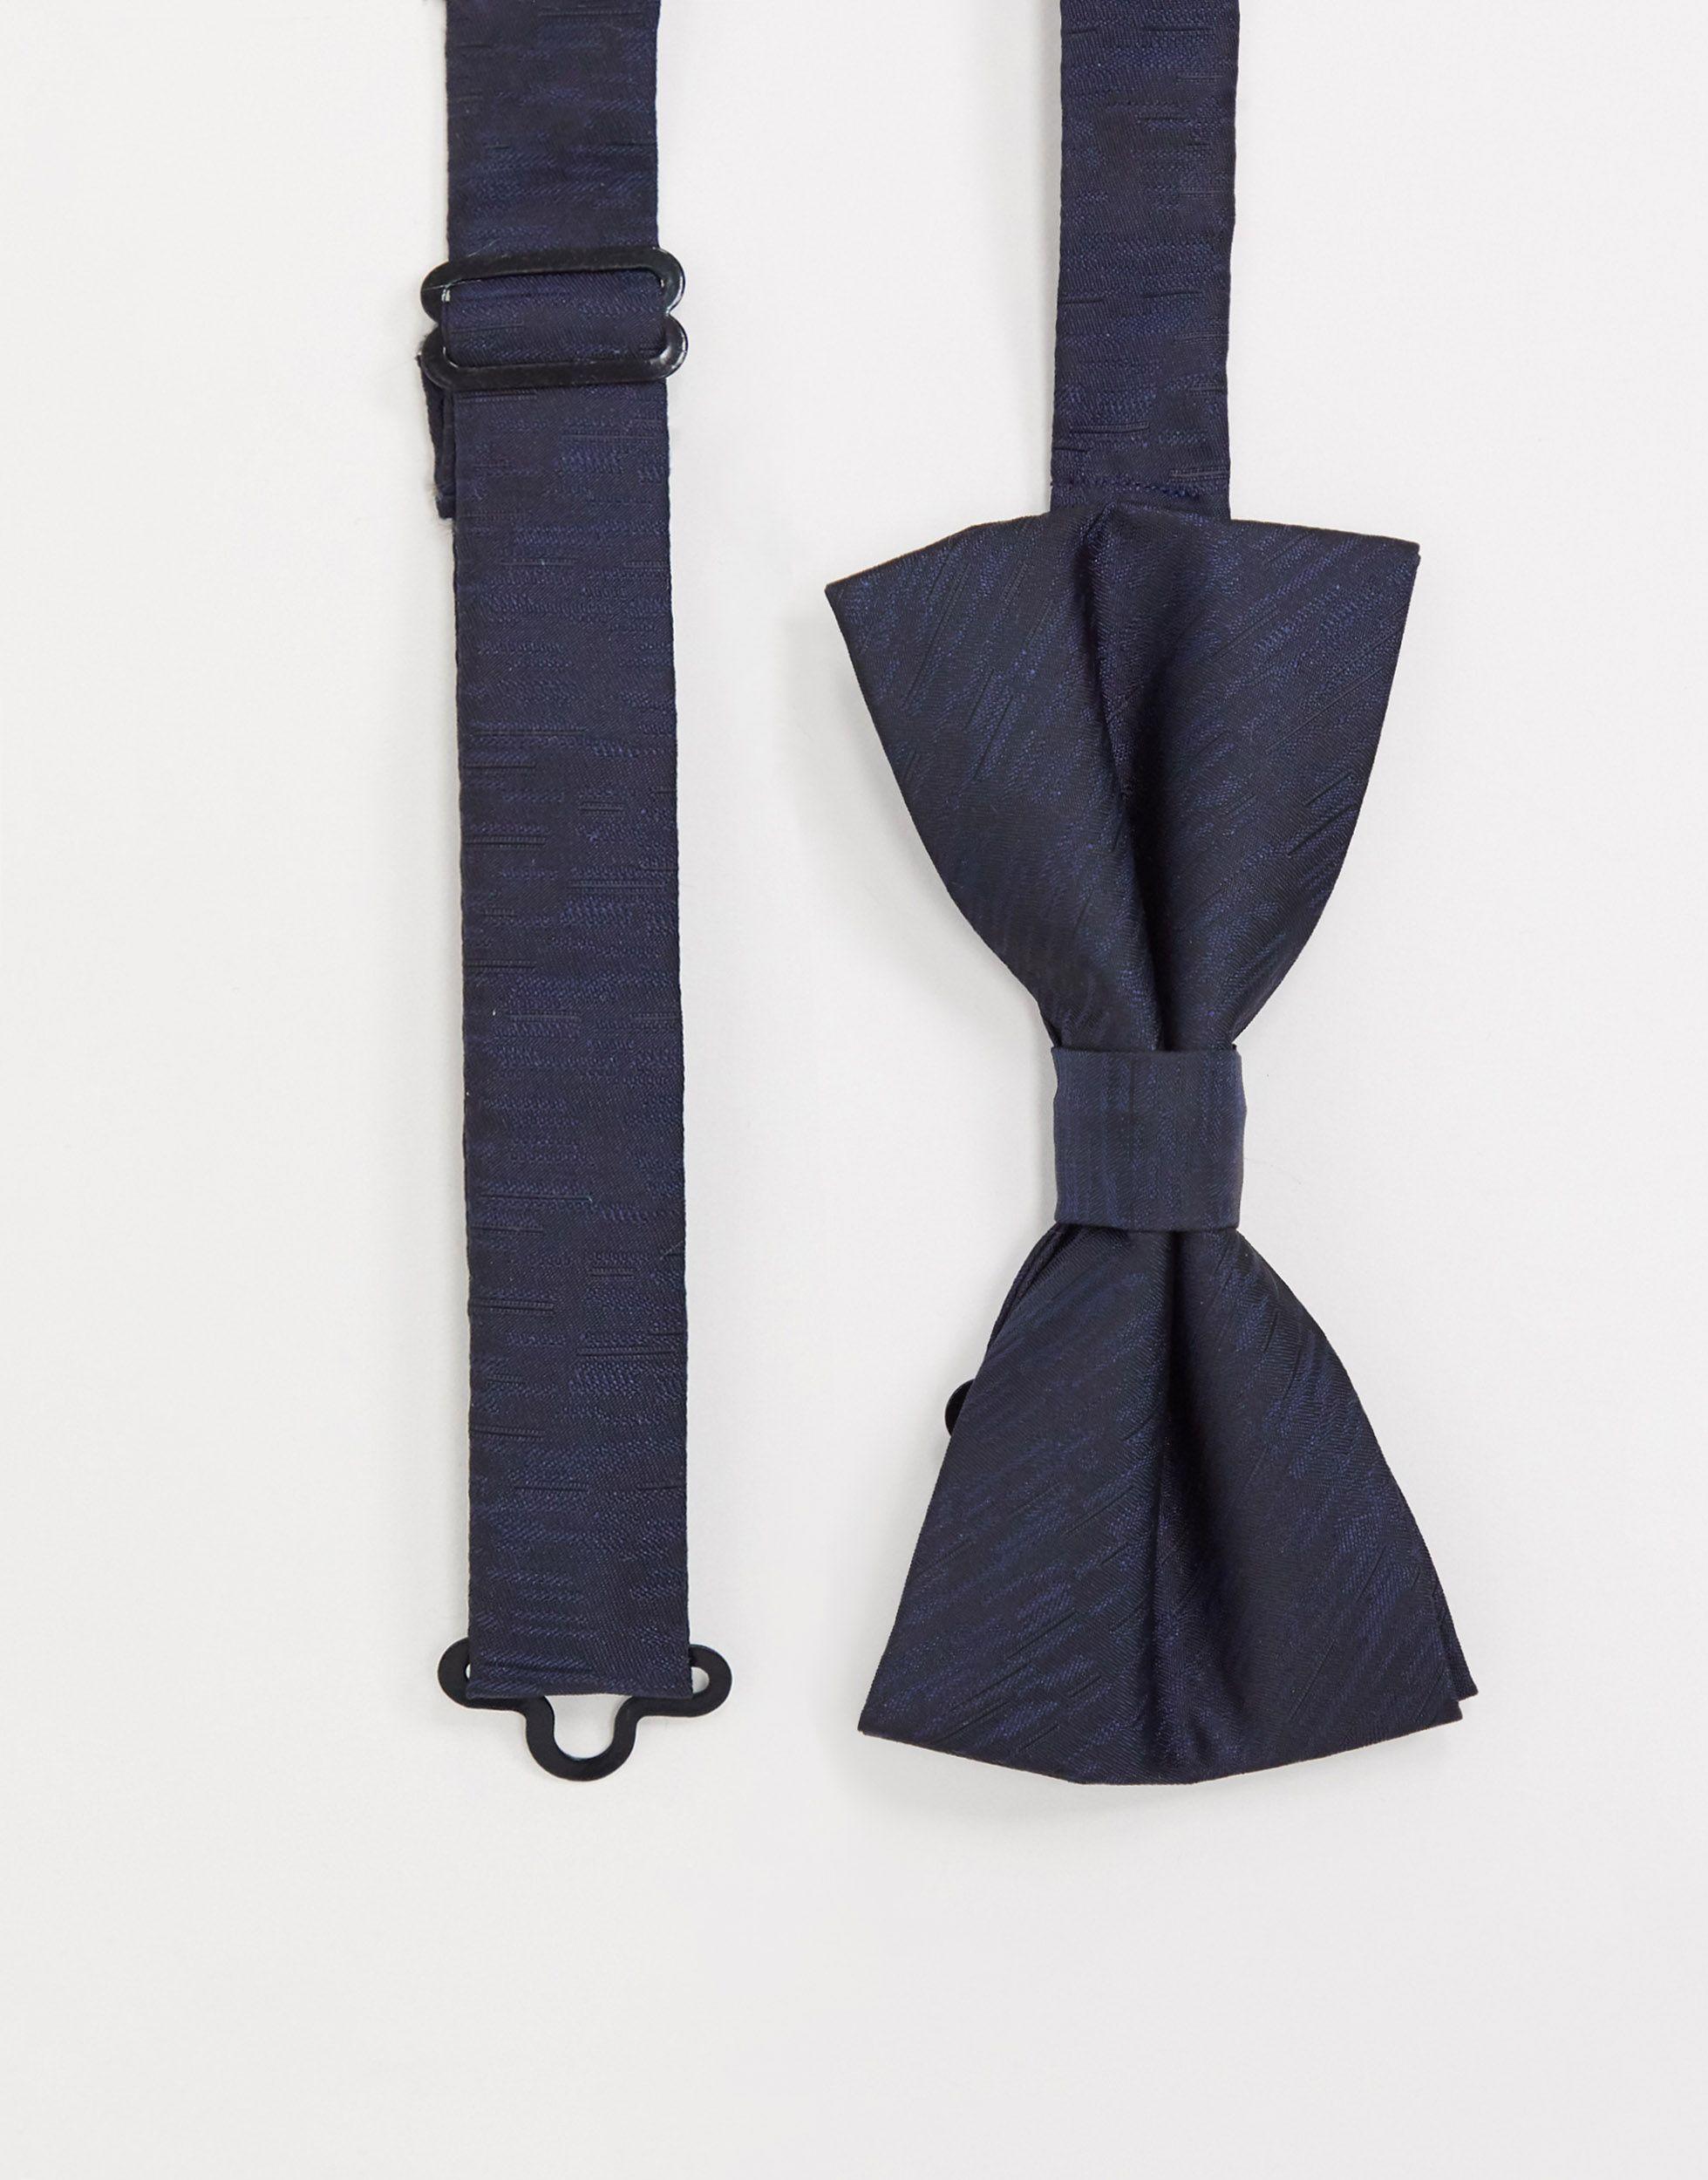 French Connection Plain Bow Tie in Navy (Blue) for Men - Lyst